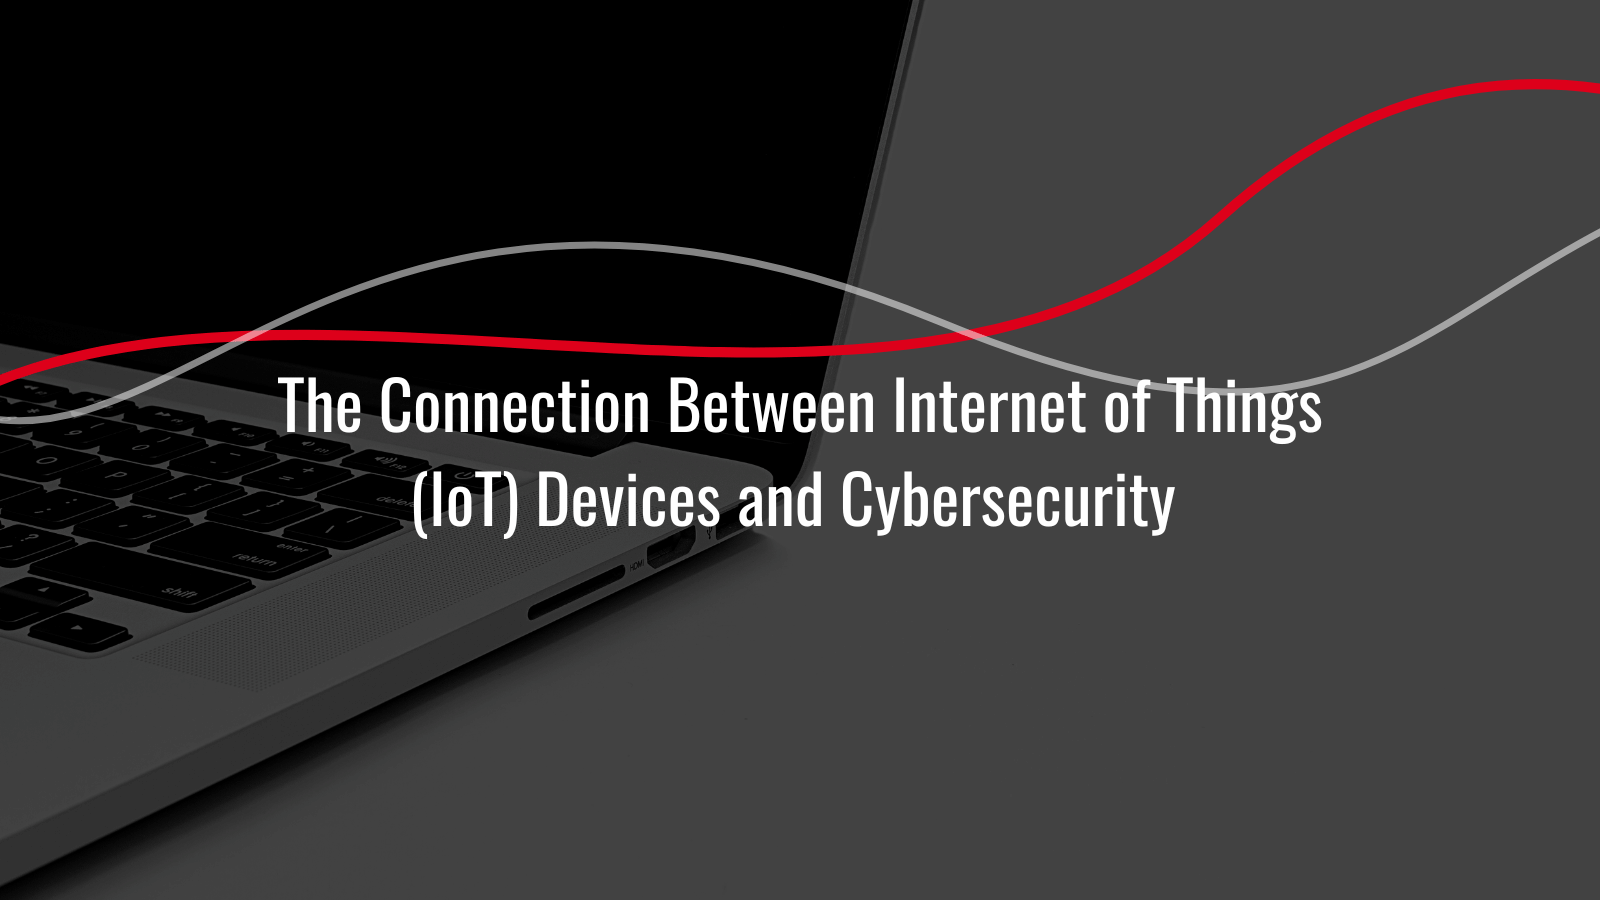 Internet of Things (IoT) Devices and Cybersecurity